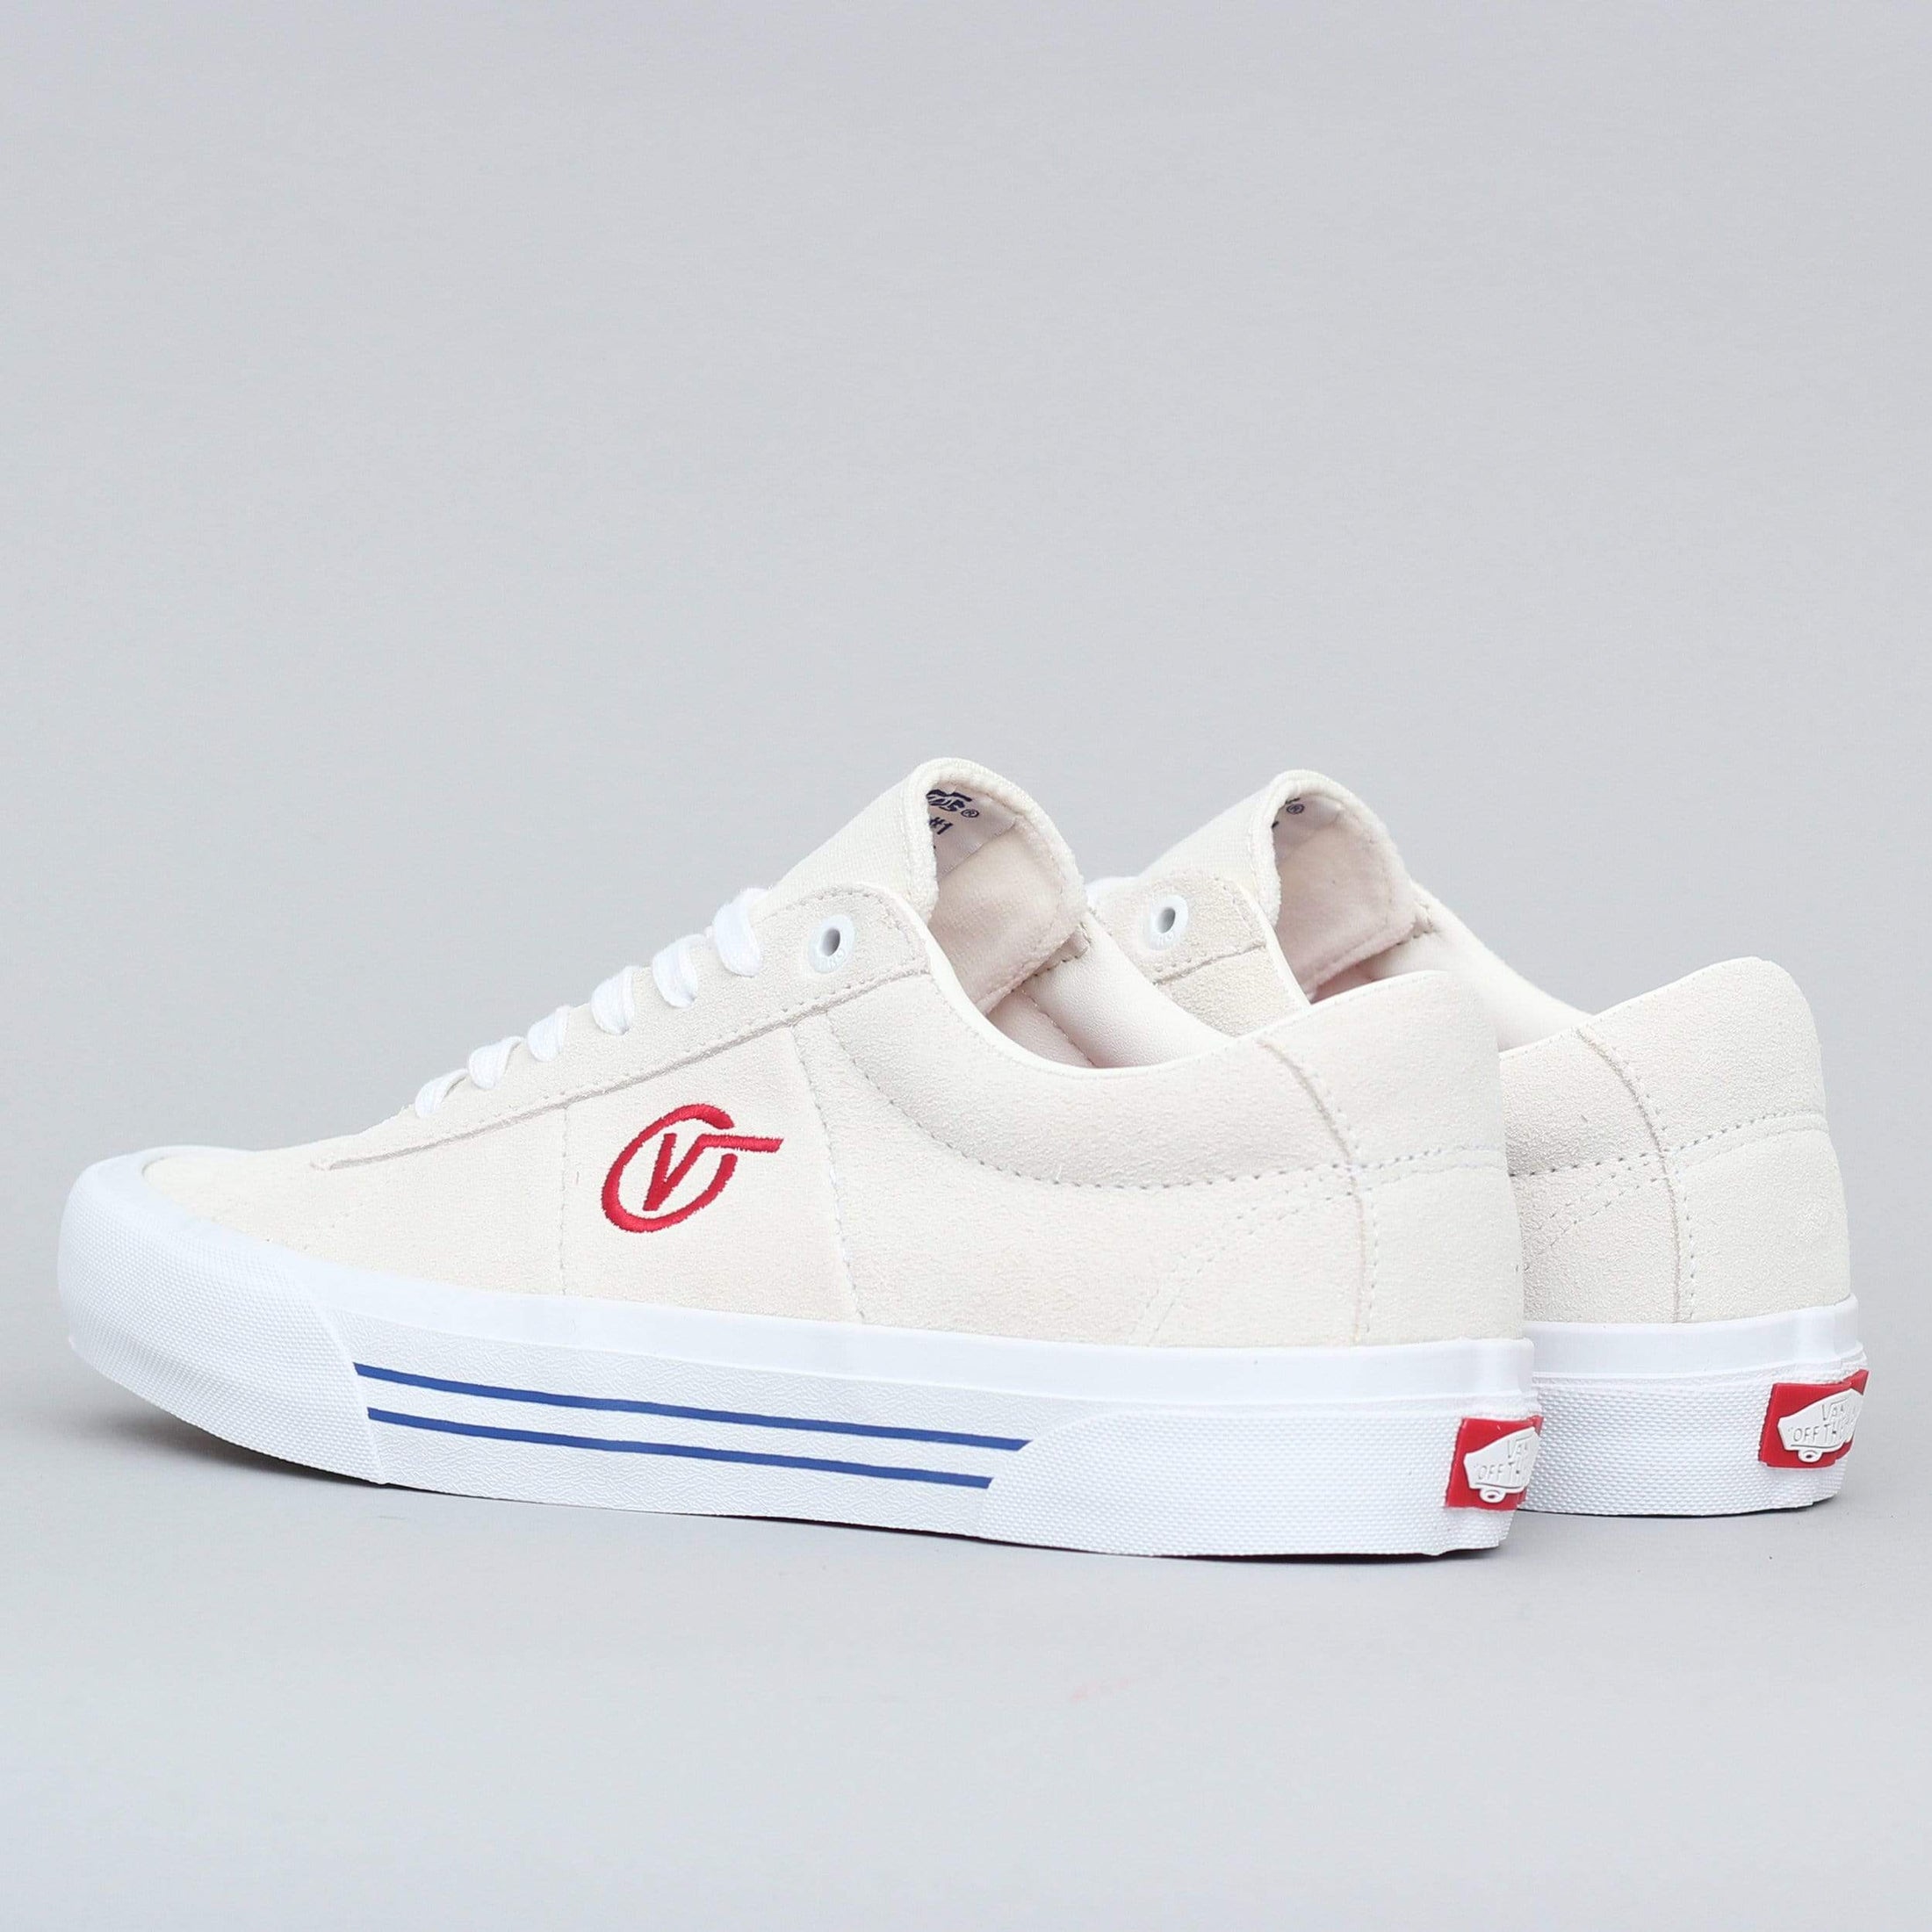 Vans Saddle Sid Pro Shoes Marshmallow / Racing Red